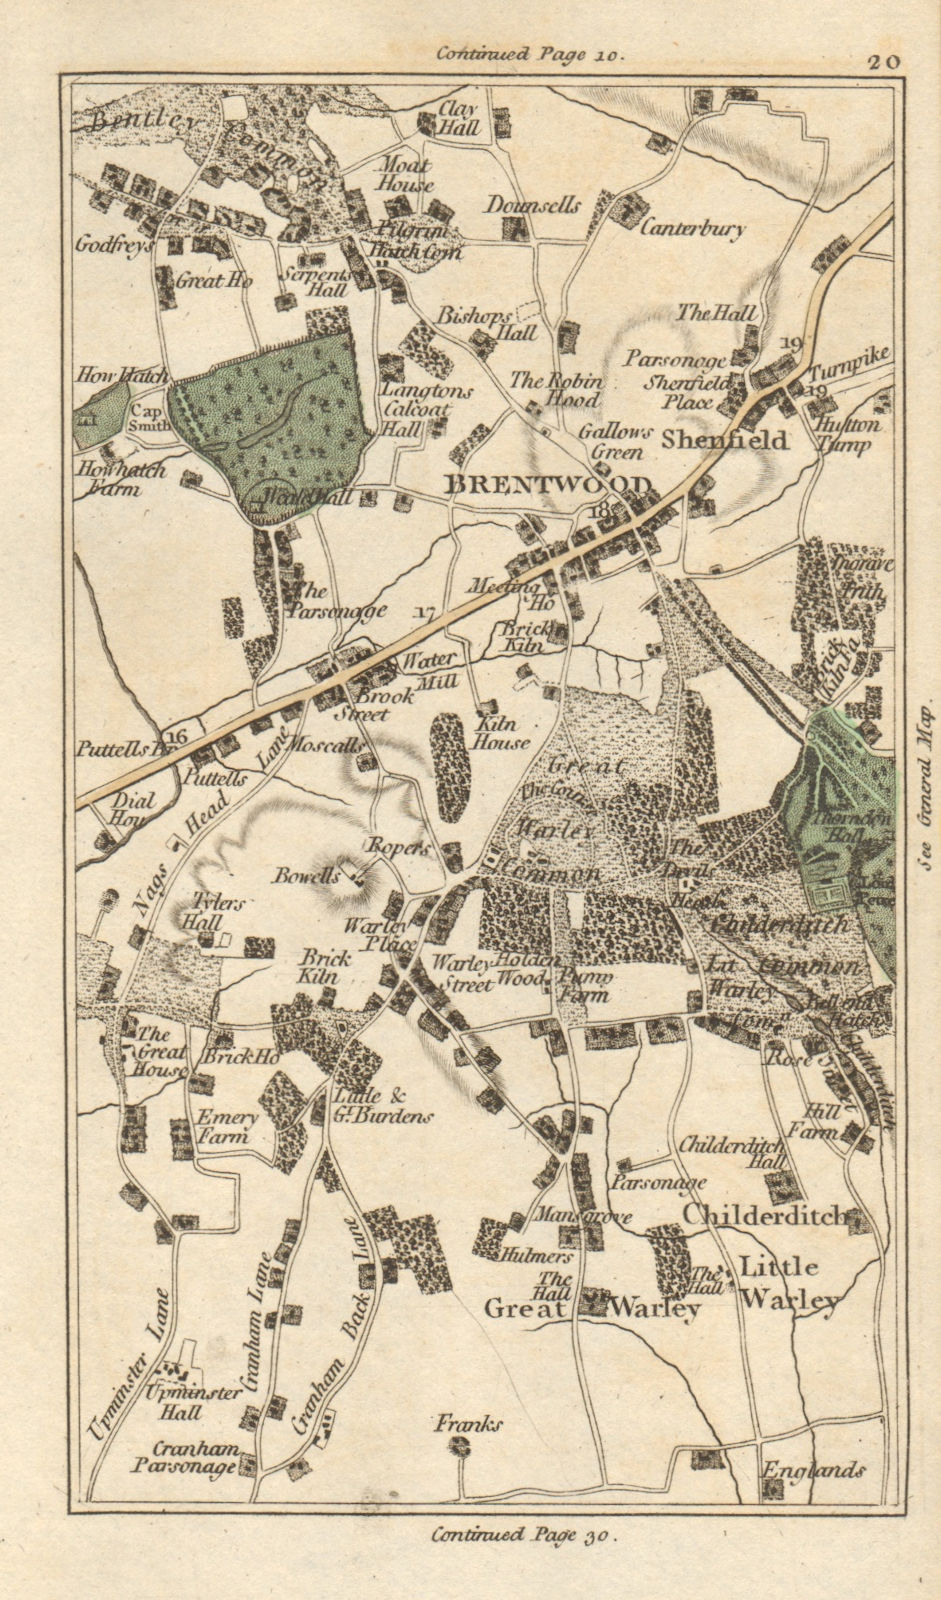 BRENTWOOD Upminster Little Great Warley Childerditch Shenfield CARY 1786 map